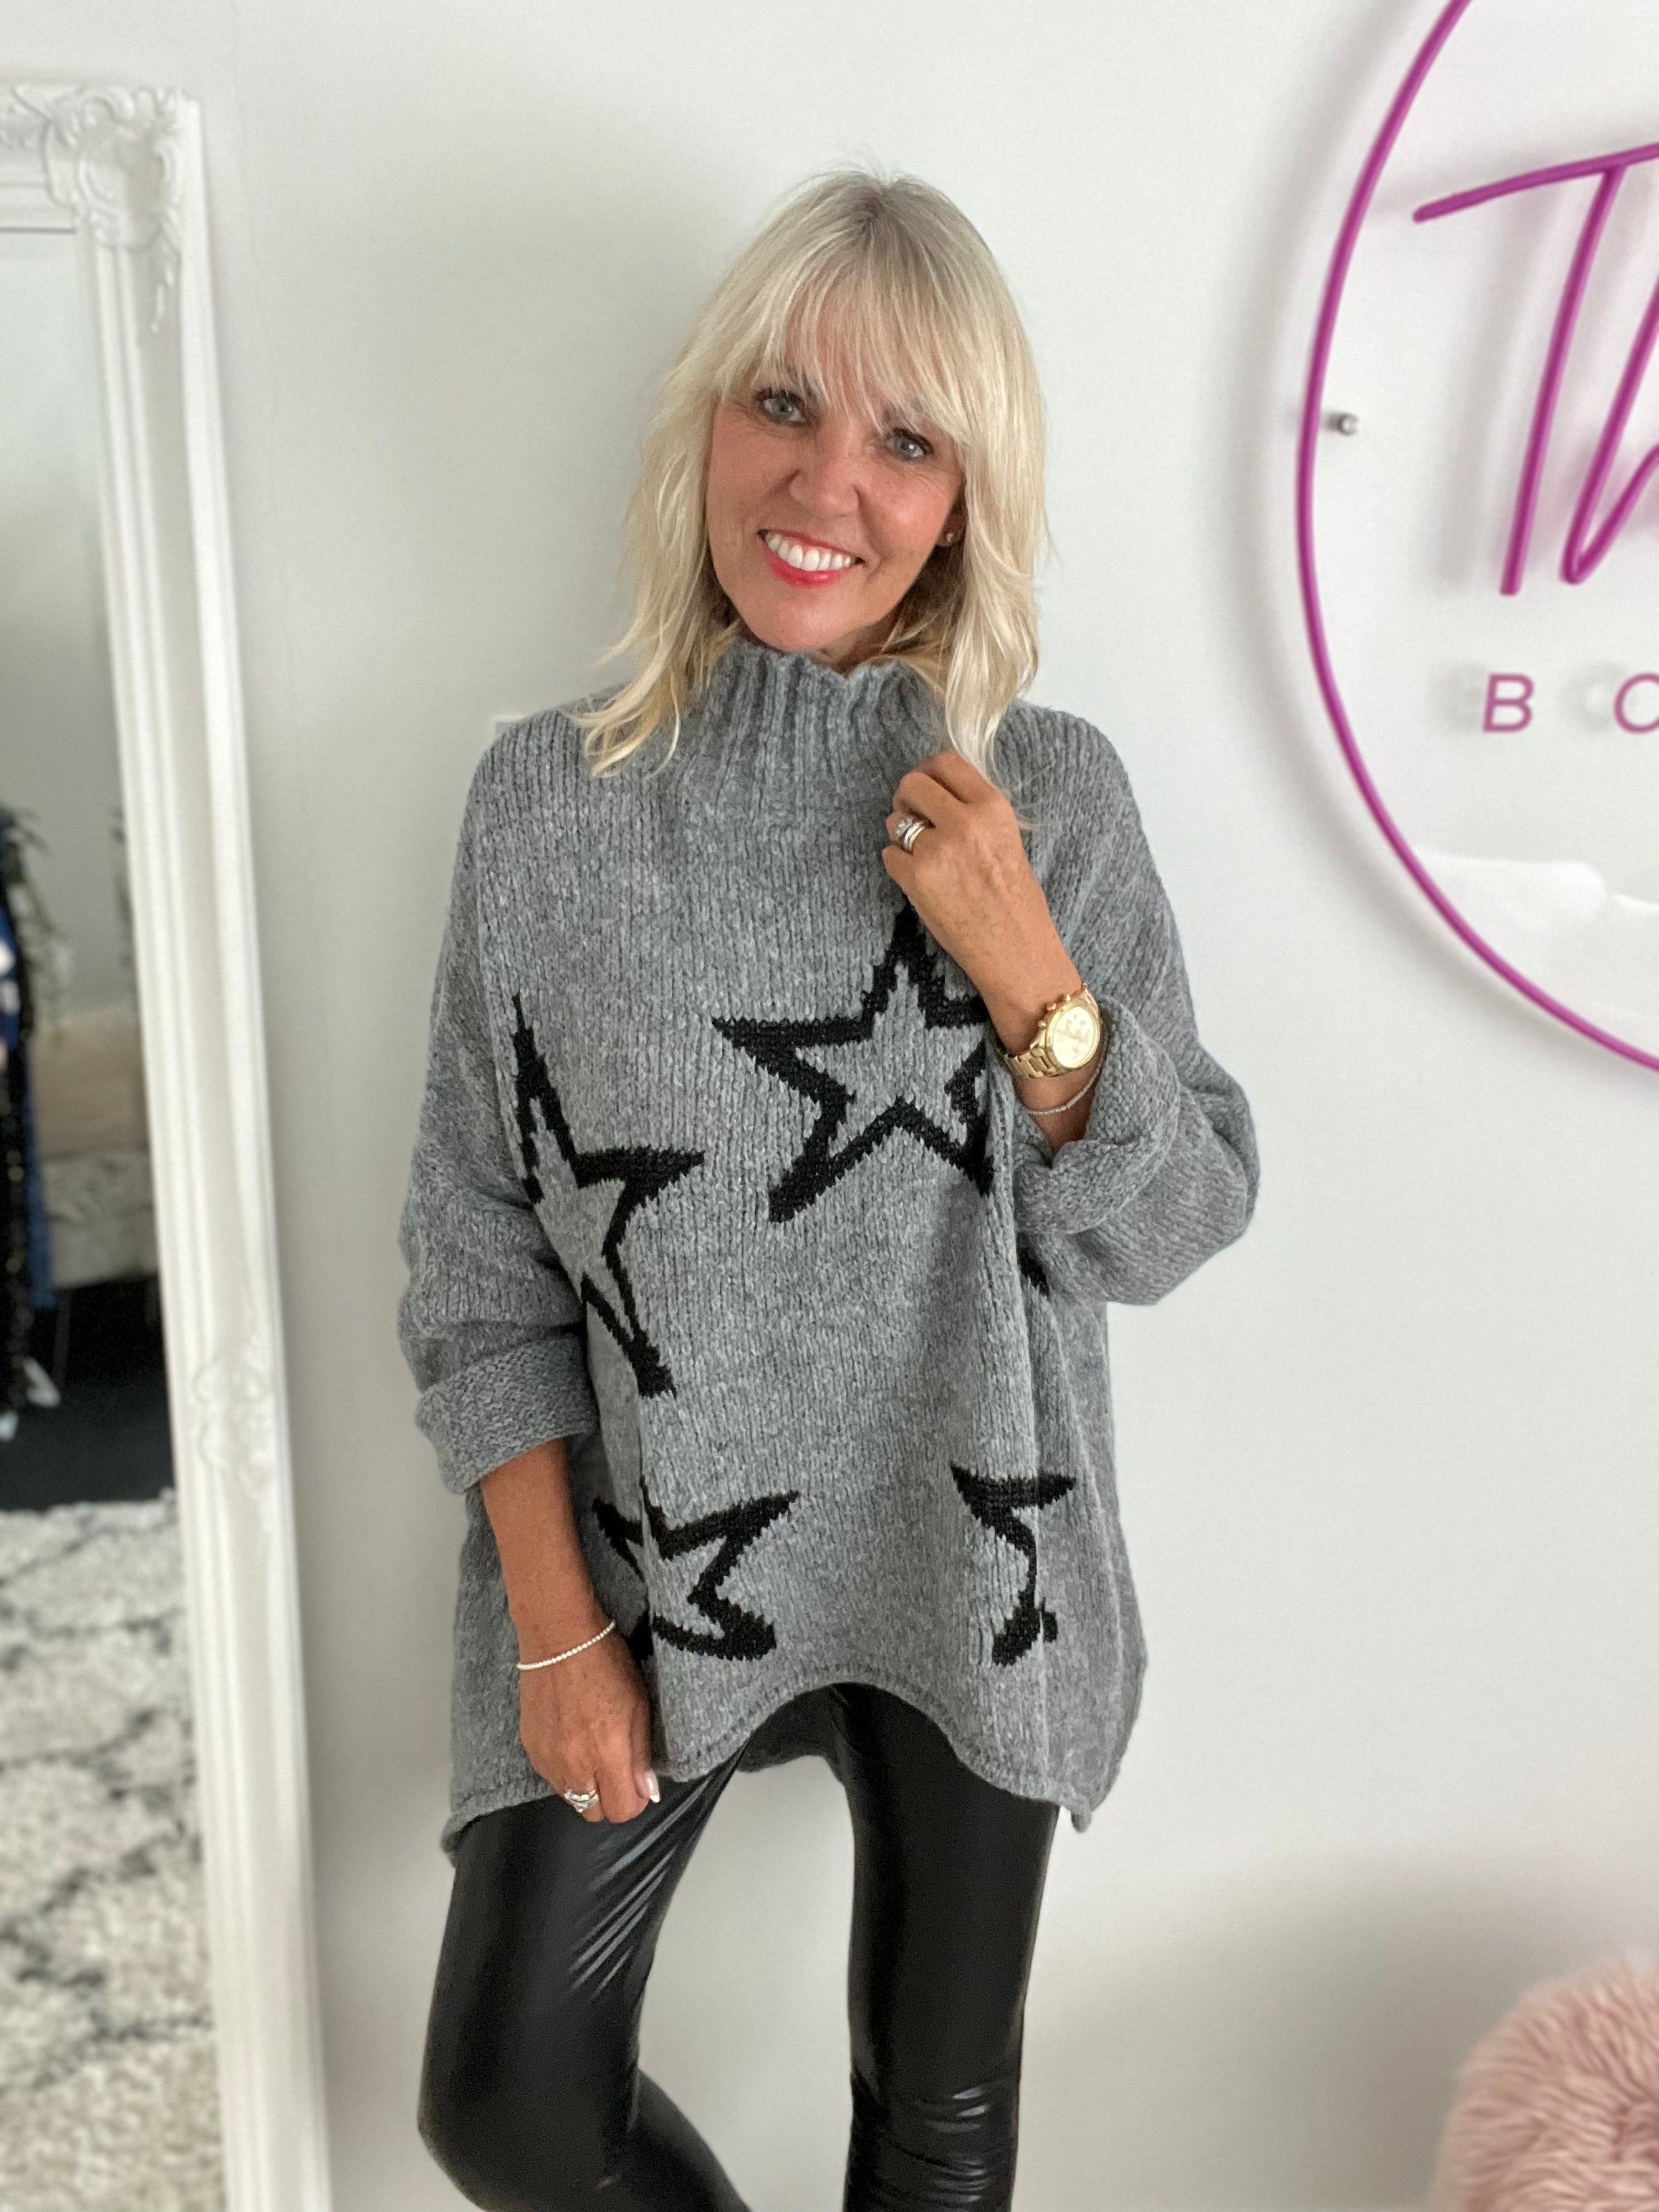 Oversized Luxe Star Jumper in Charcoal